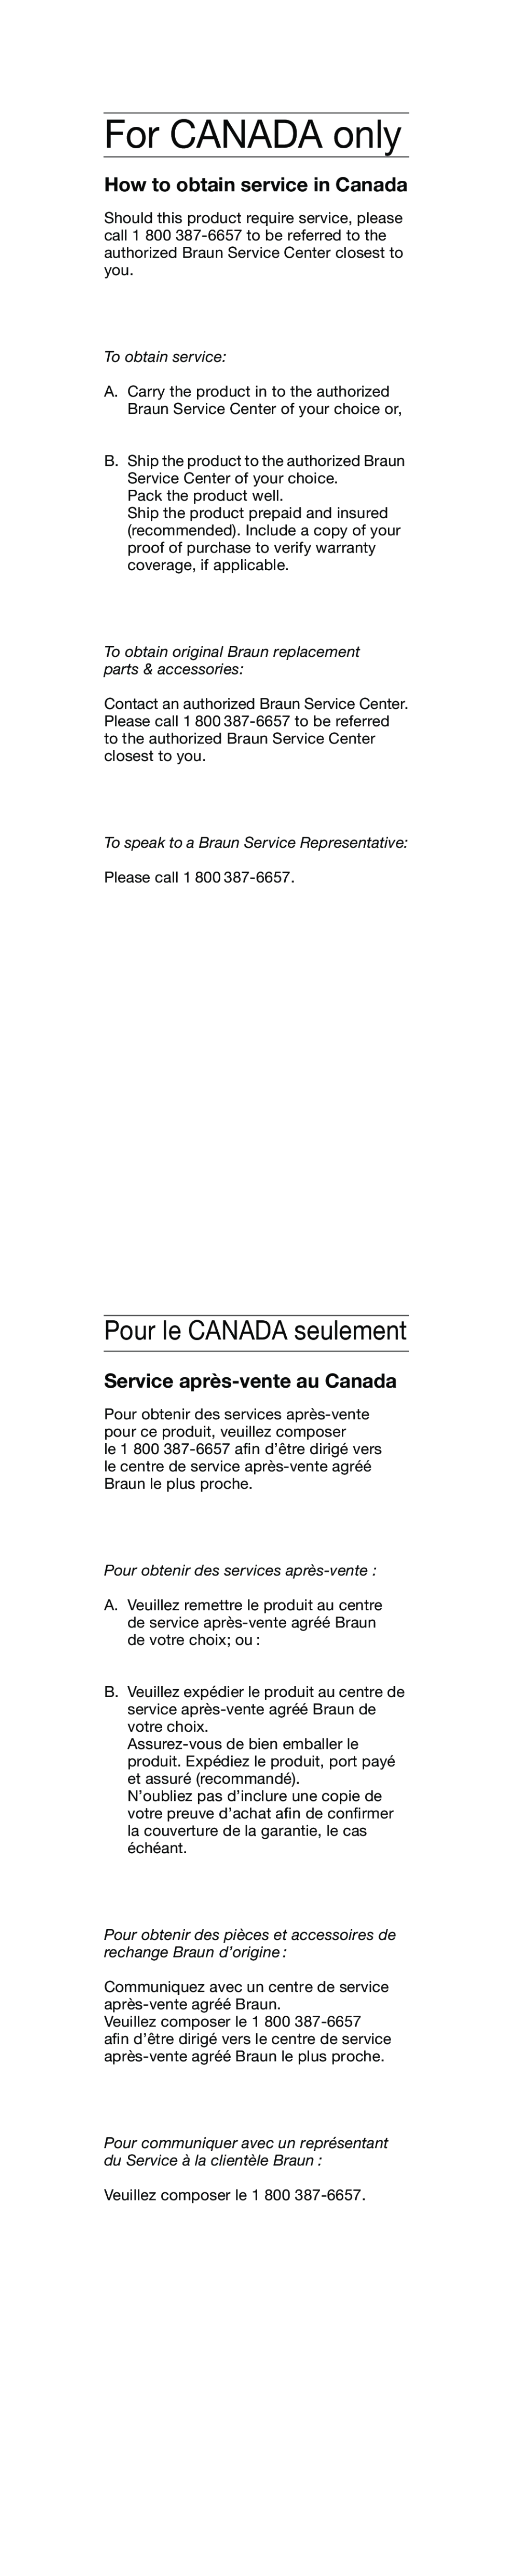 Braun 4728 manual How to obtain service in Canada, Service après-vente au Canada, For CANADA only, Pour le CANADA seulement 